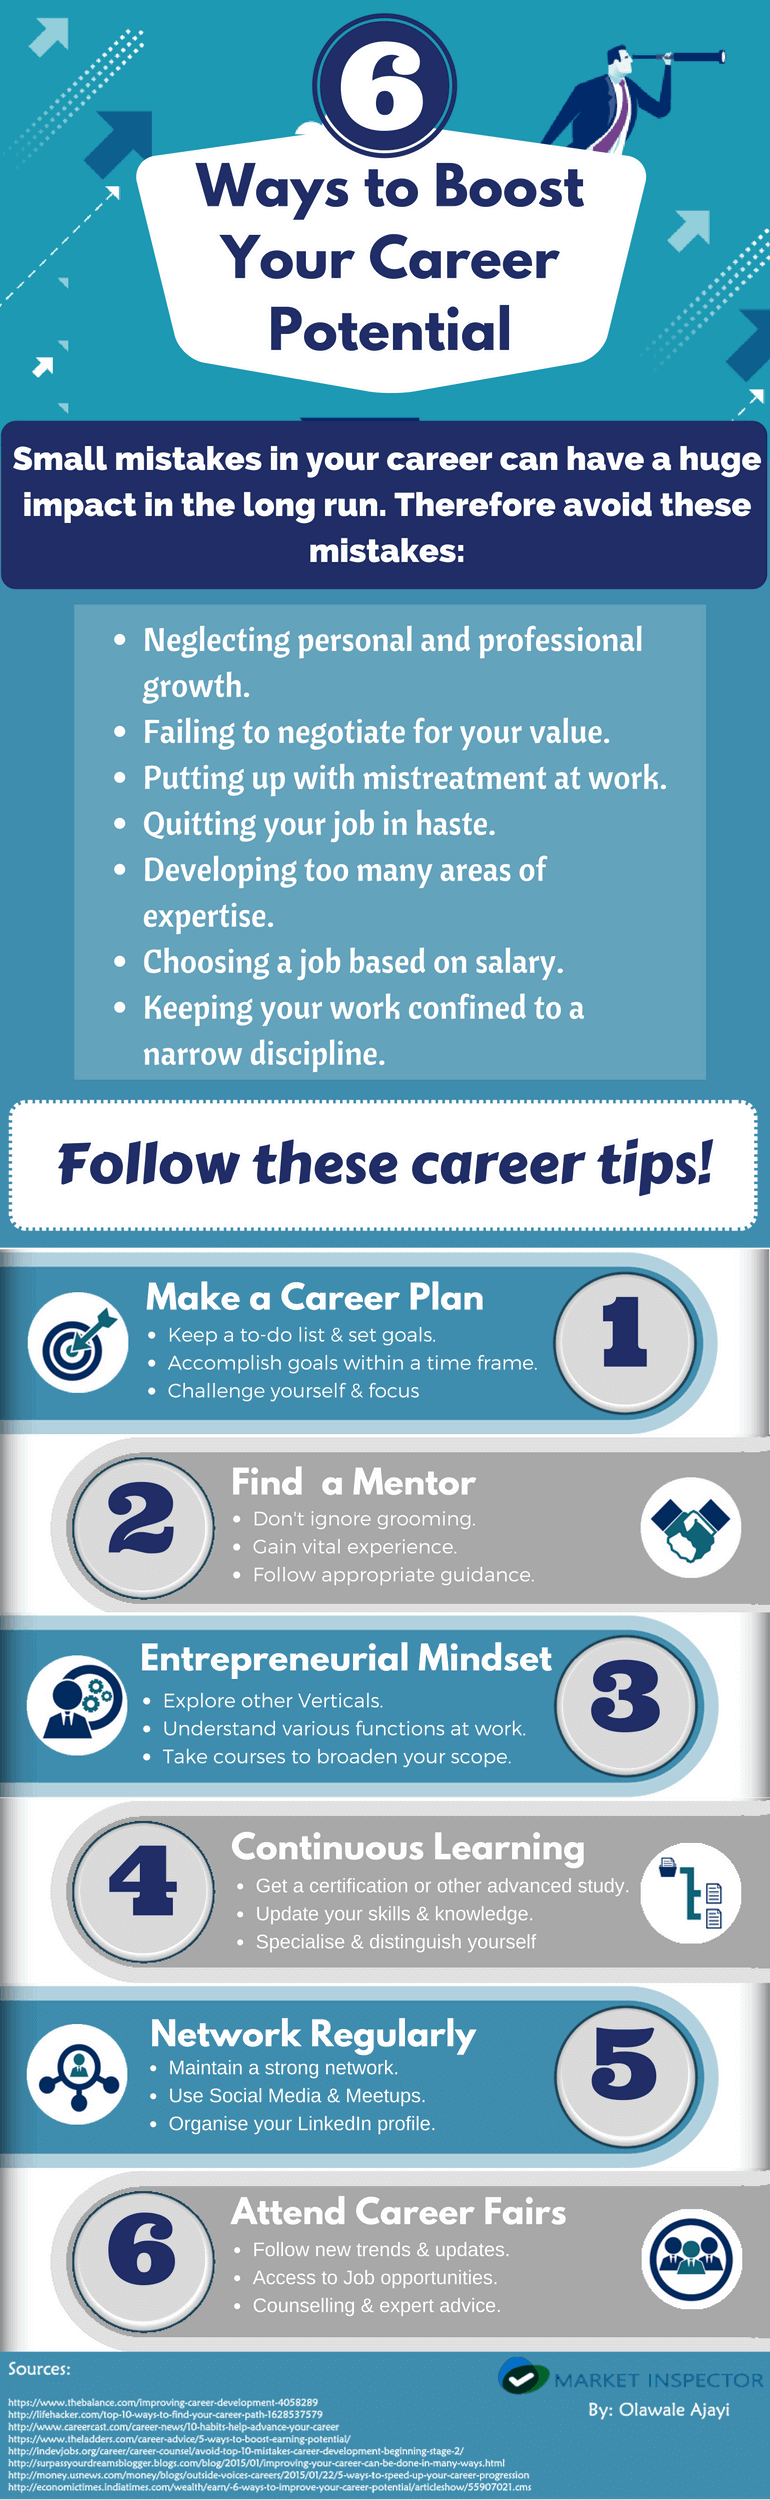 Boost Your Career Potential